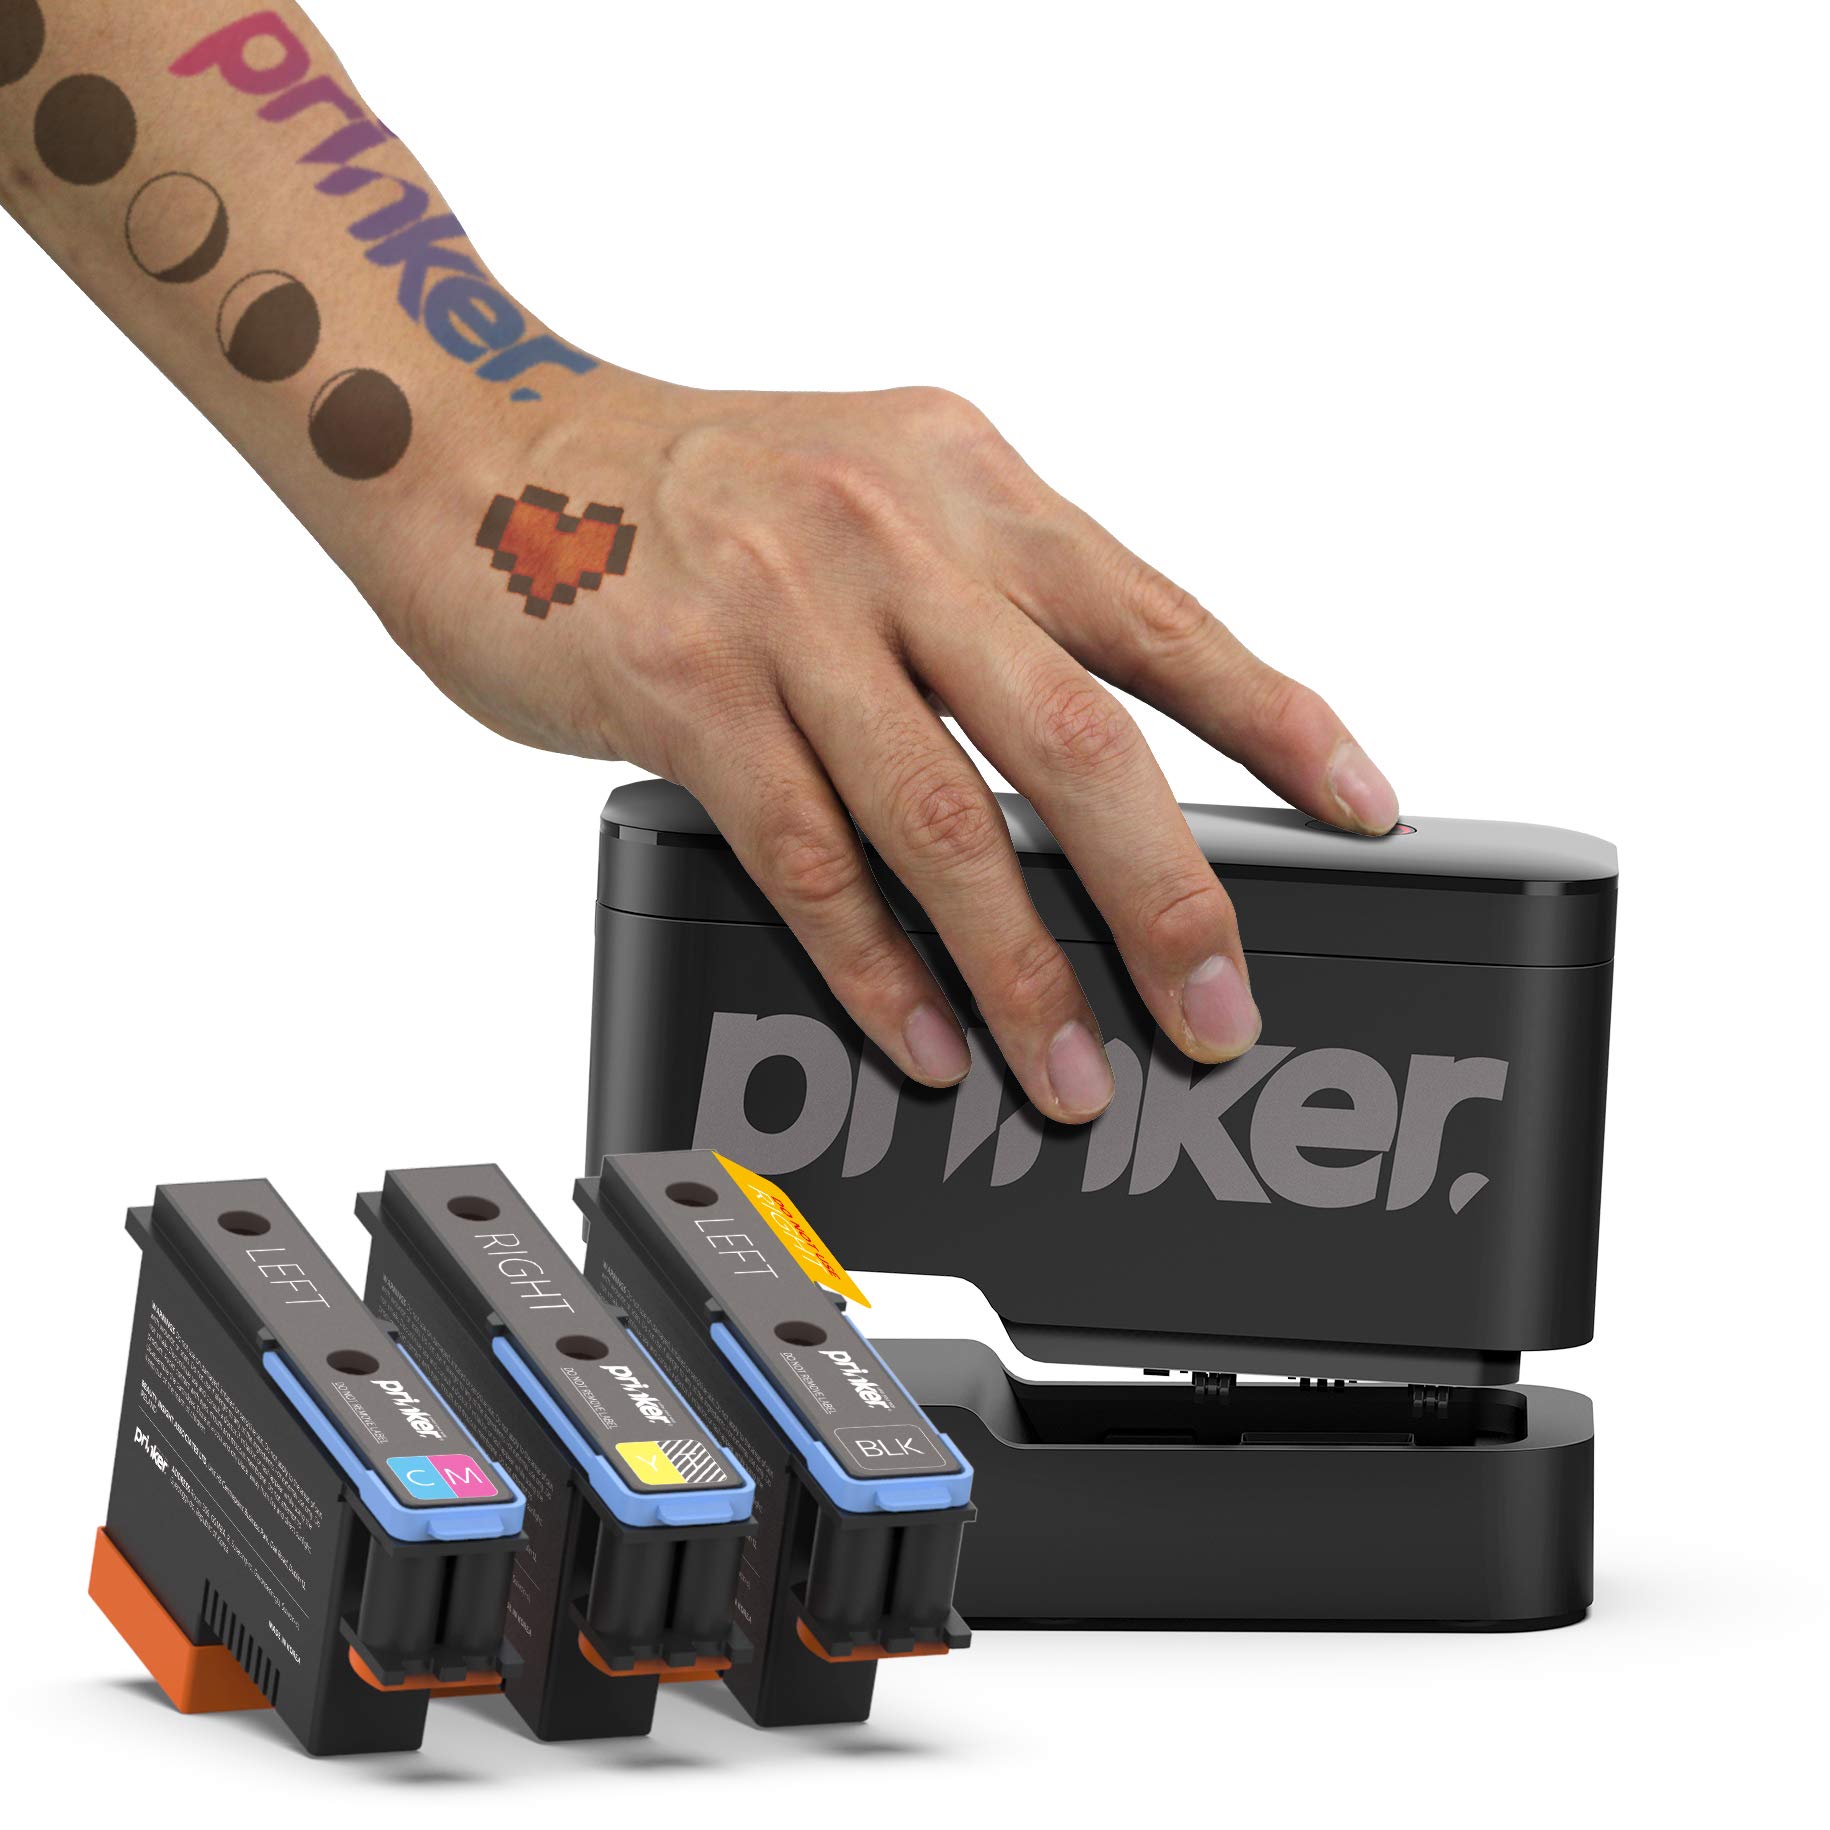 Prinker S Temporary Tattoo Device Package for Your Instant Custom Temporary Tattoos with Premium Cosmetic Full Color + Black Ink - Compatible w/iOS & Android devices